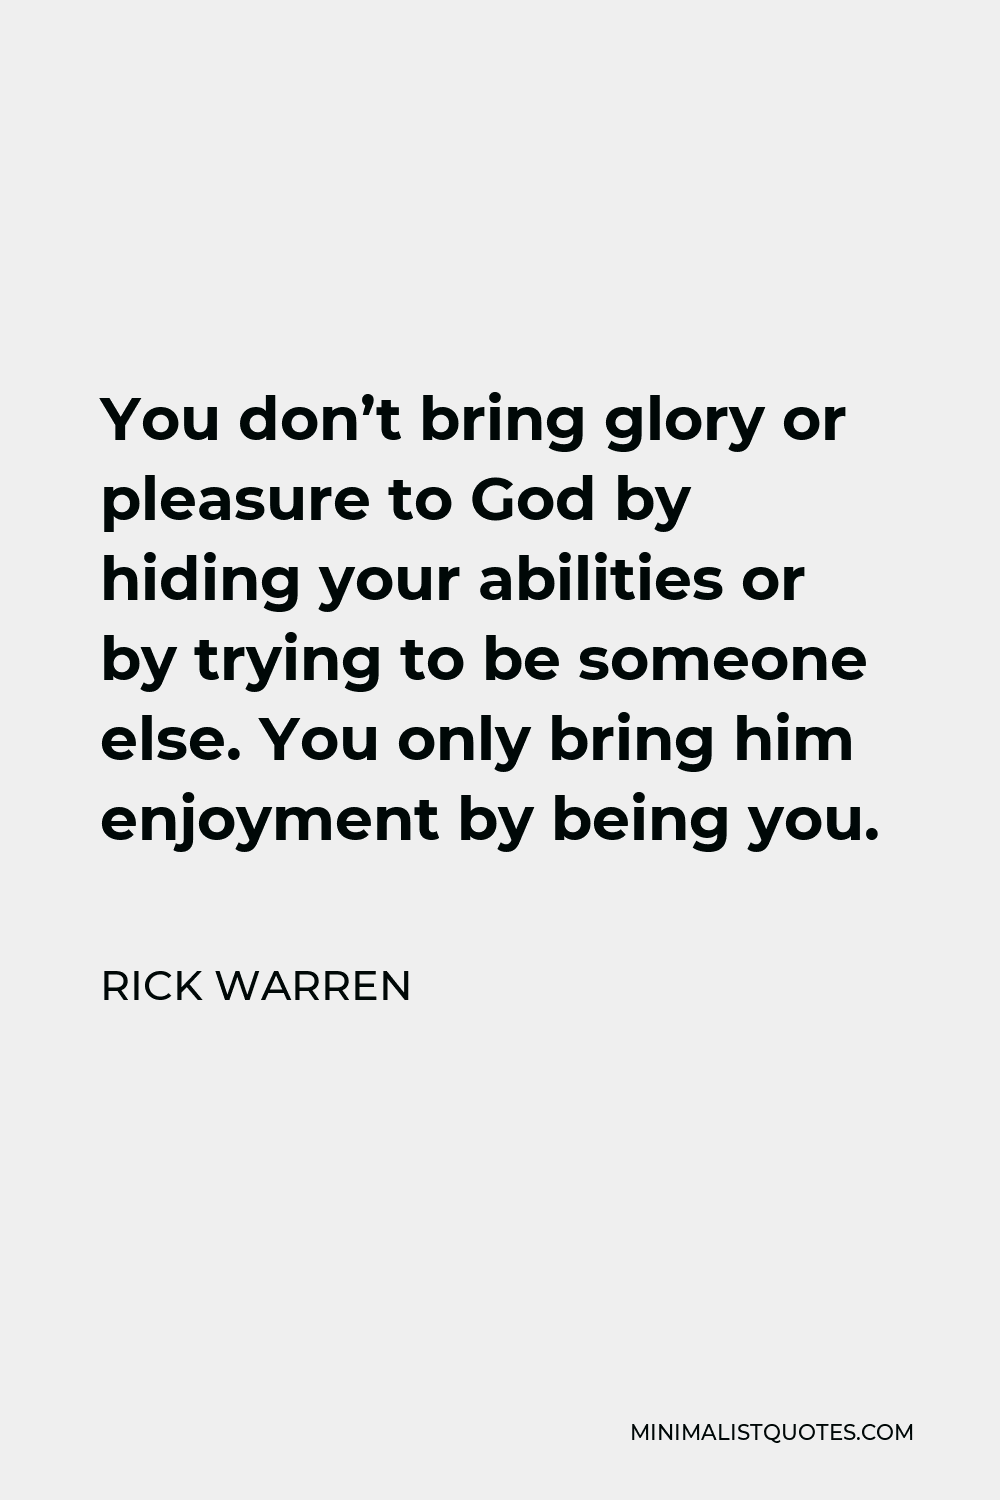 Rick Warren Quote - You don’t bring glory or pleasure to God by hiding your abilities or by trying to be someone else. You only bring him enjoyment by being you.